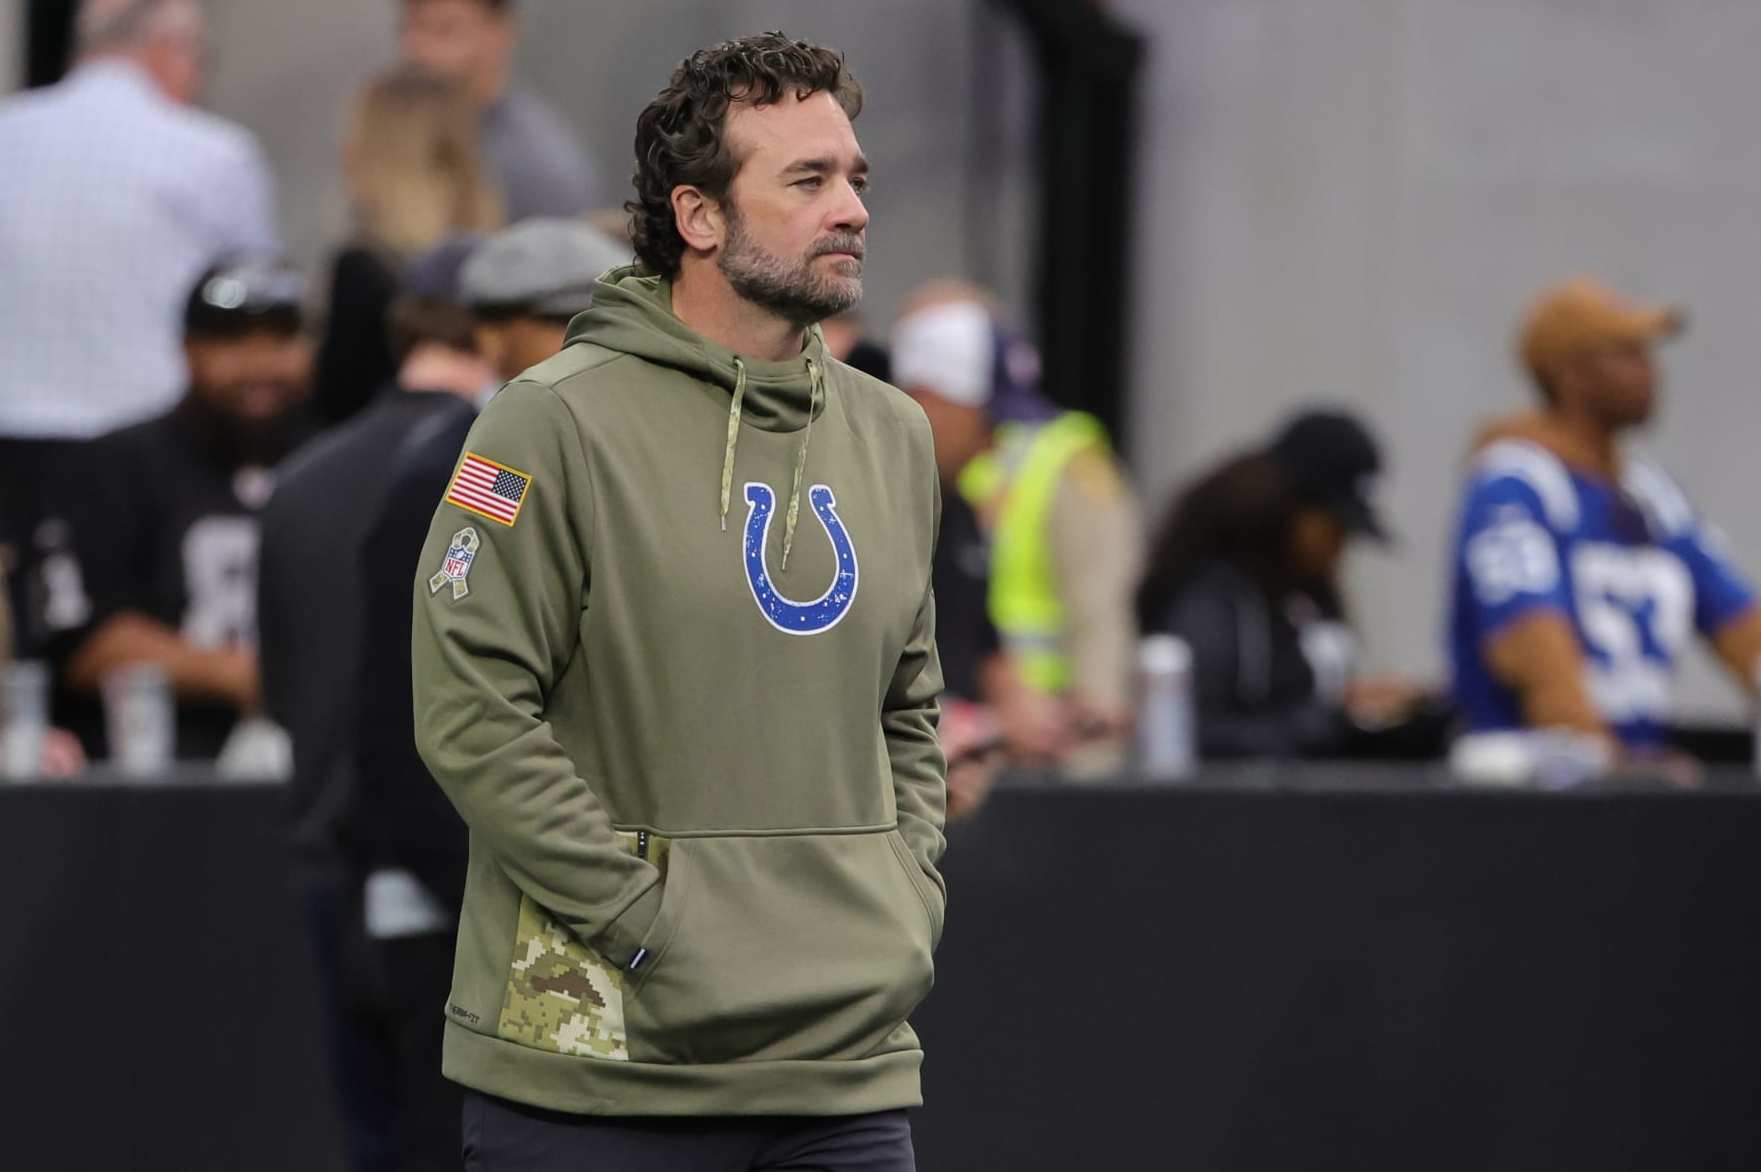 NFL Rumors: Jeff Saturday to Have 2nd Interview for Colts Head